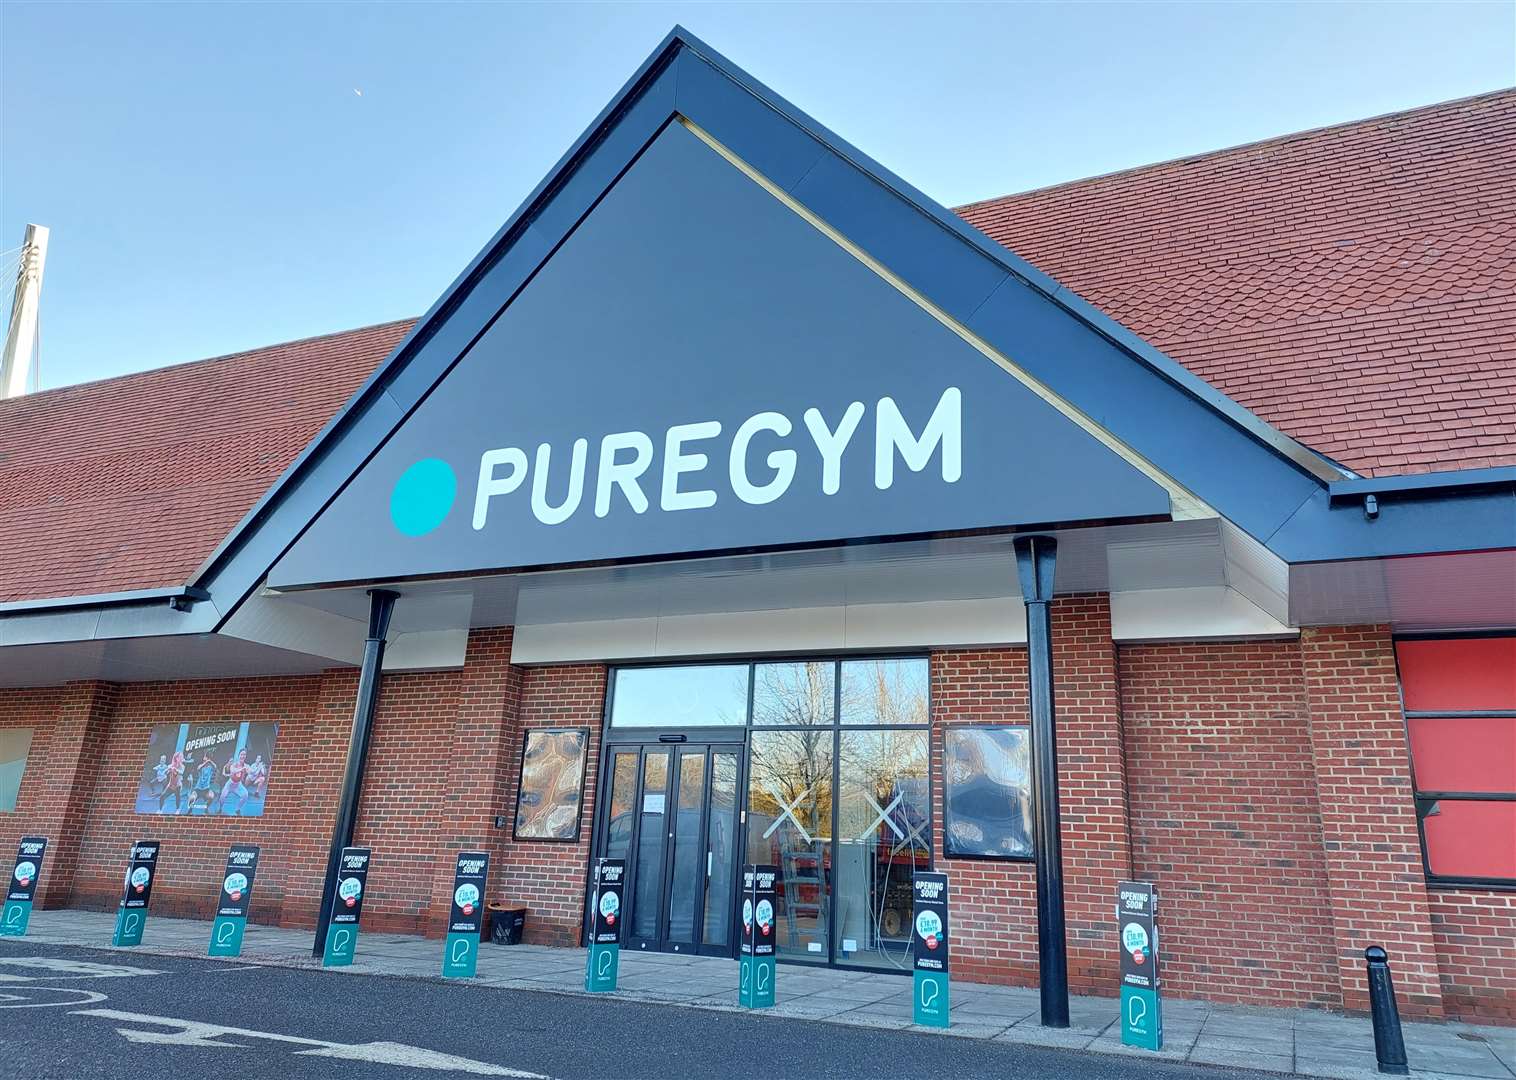 PureGym is set to open its Ashford site next month